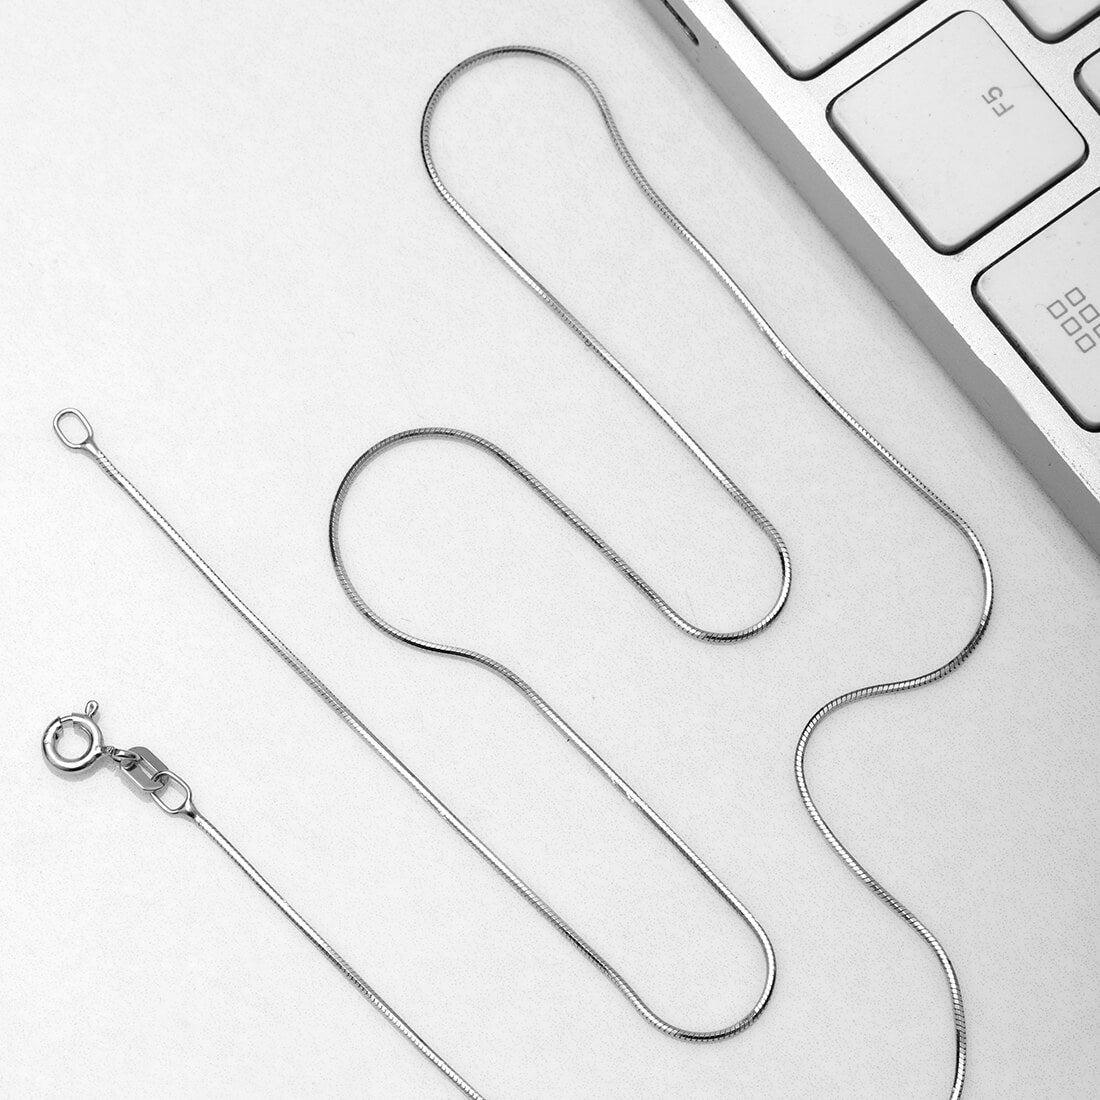 Minimalistic snake 925 Sterling chain